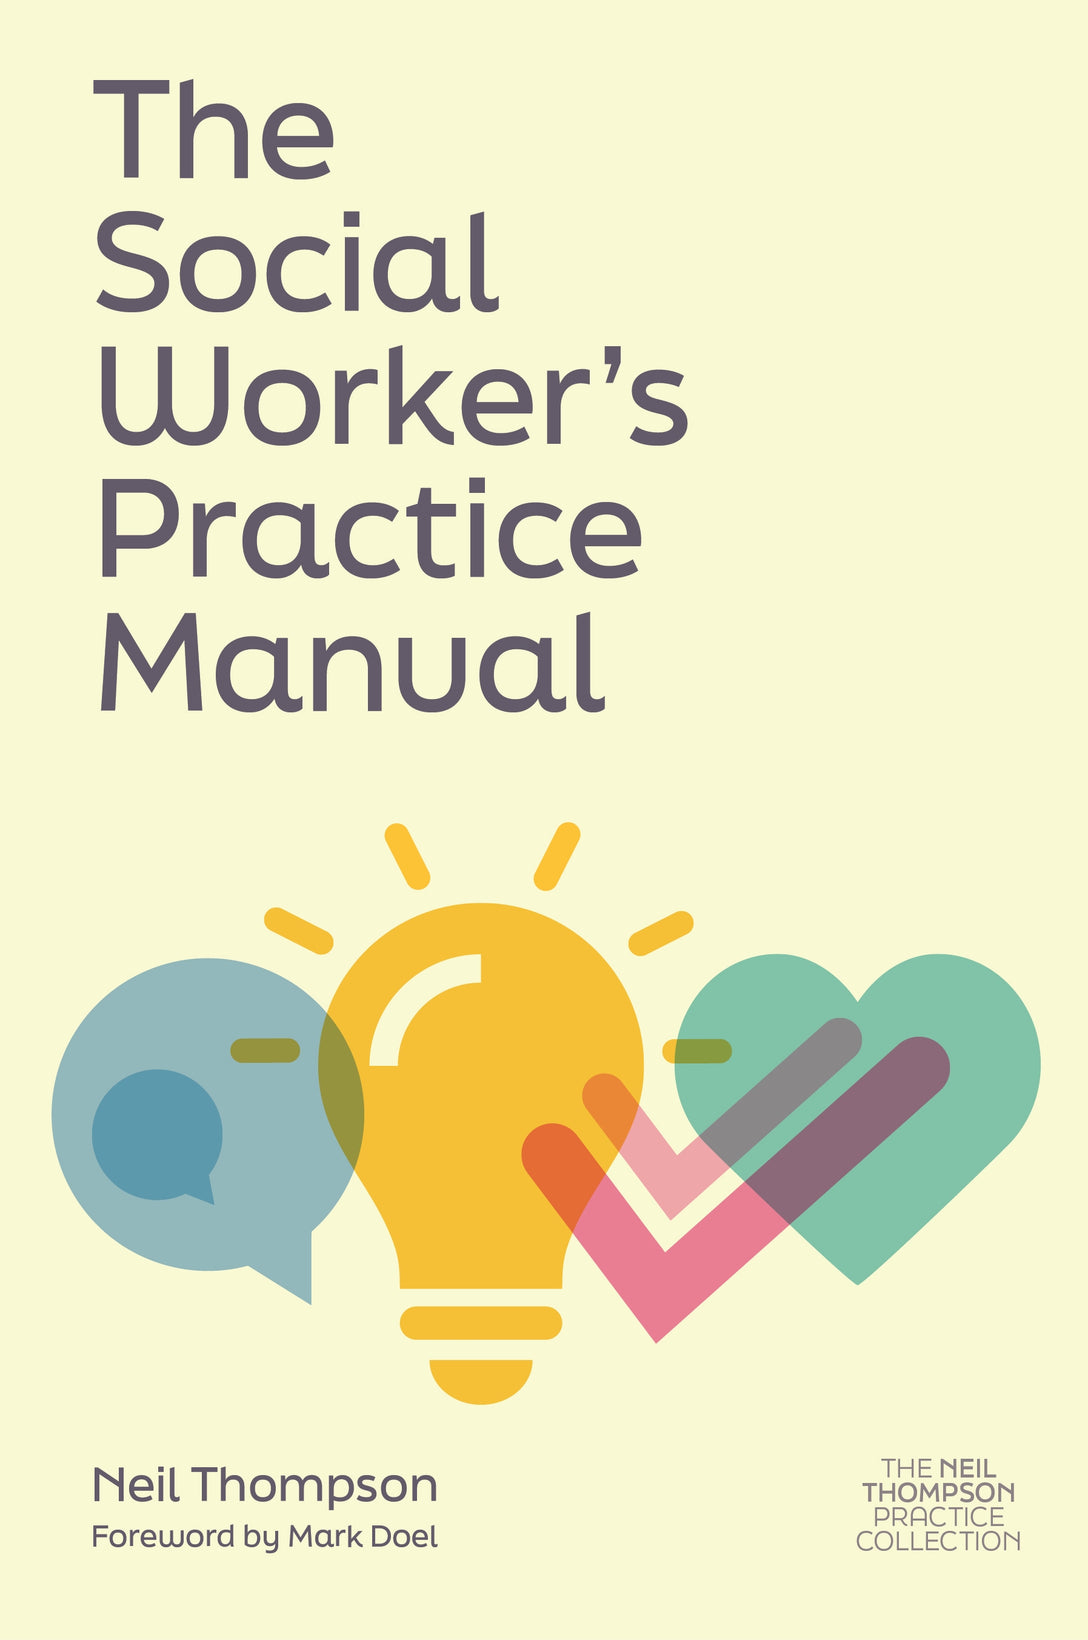 The Social Worker's Practice Manual by Mark Doel, Neil Thompson